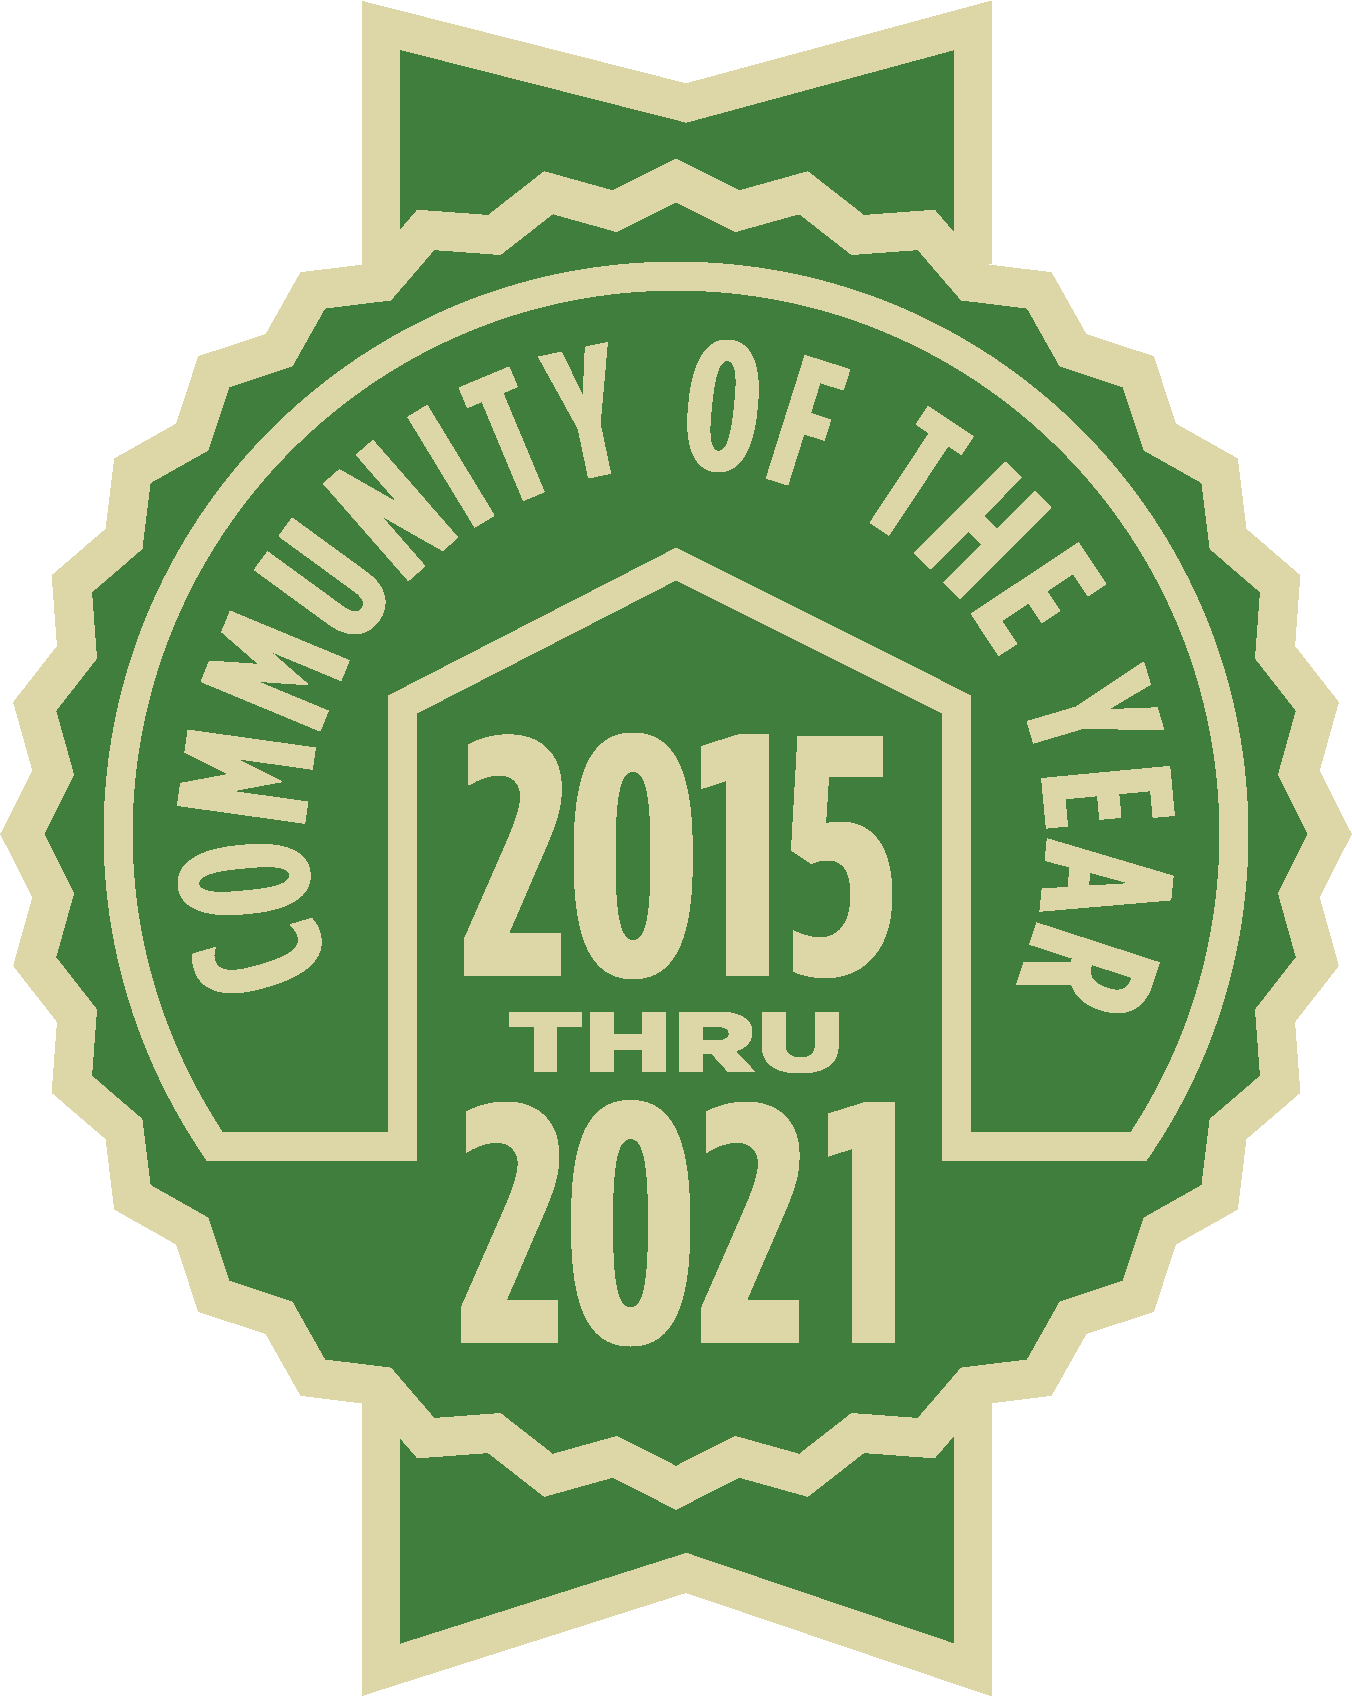 Community of the Year